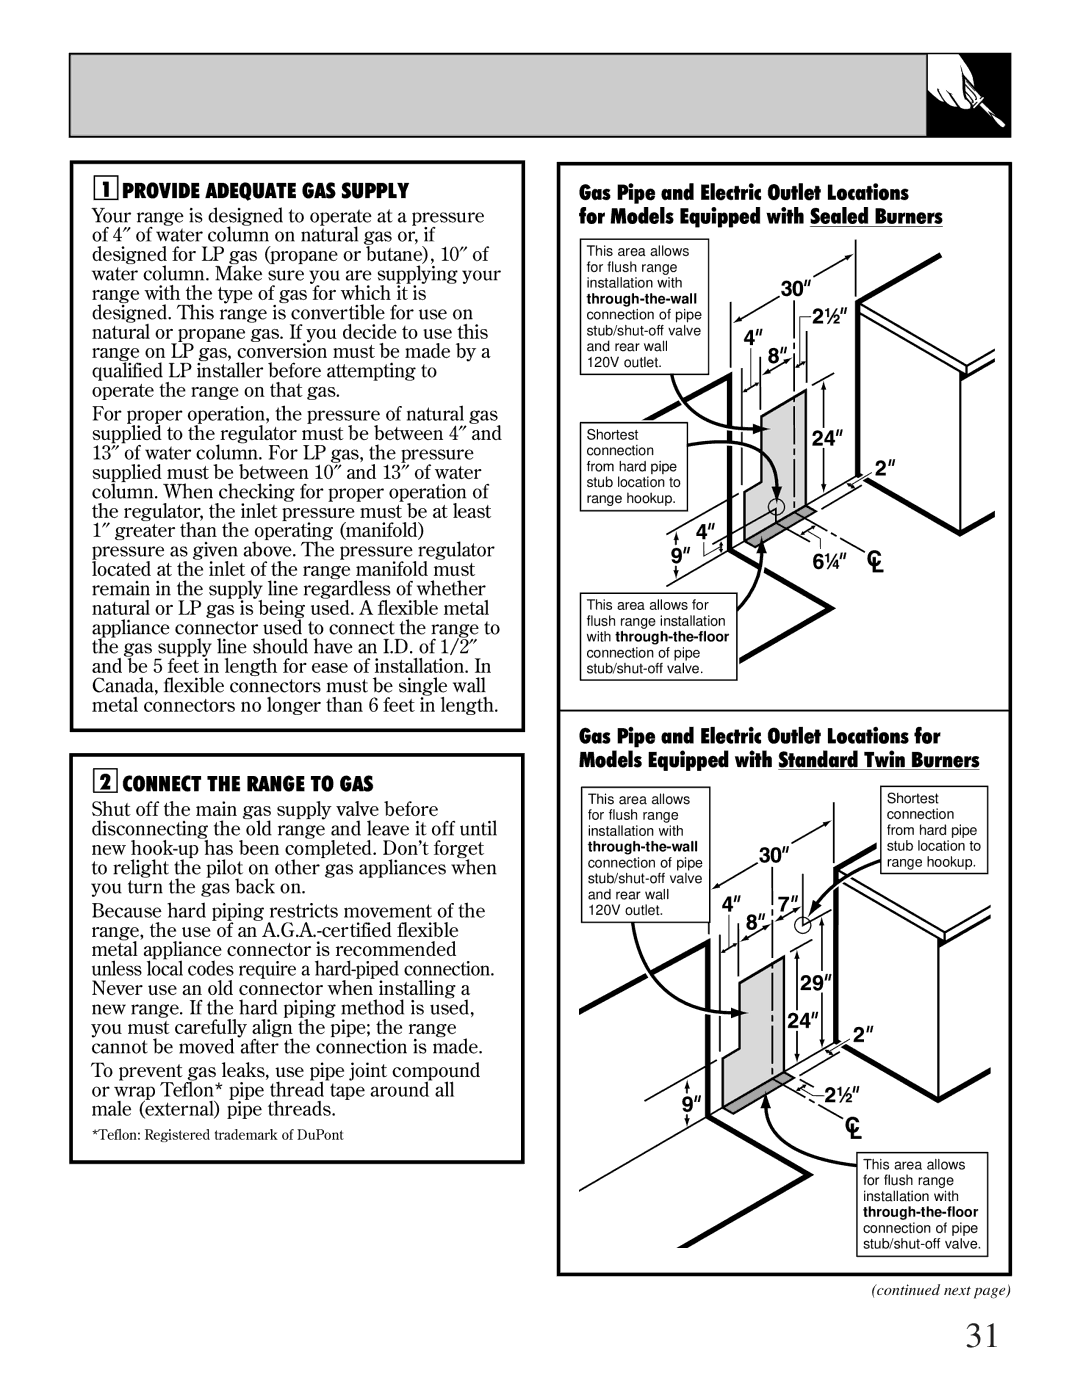 GE JGBS02, LGB128 installation instructions Provide Adequate GAS Supply 